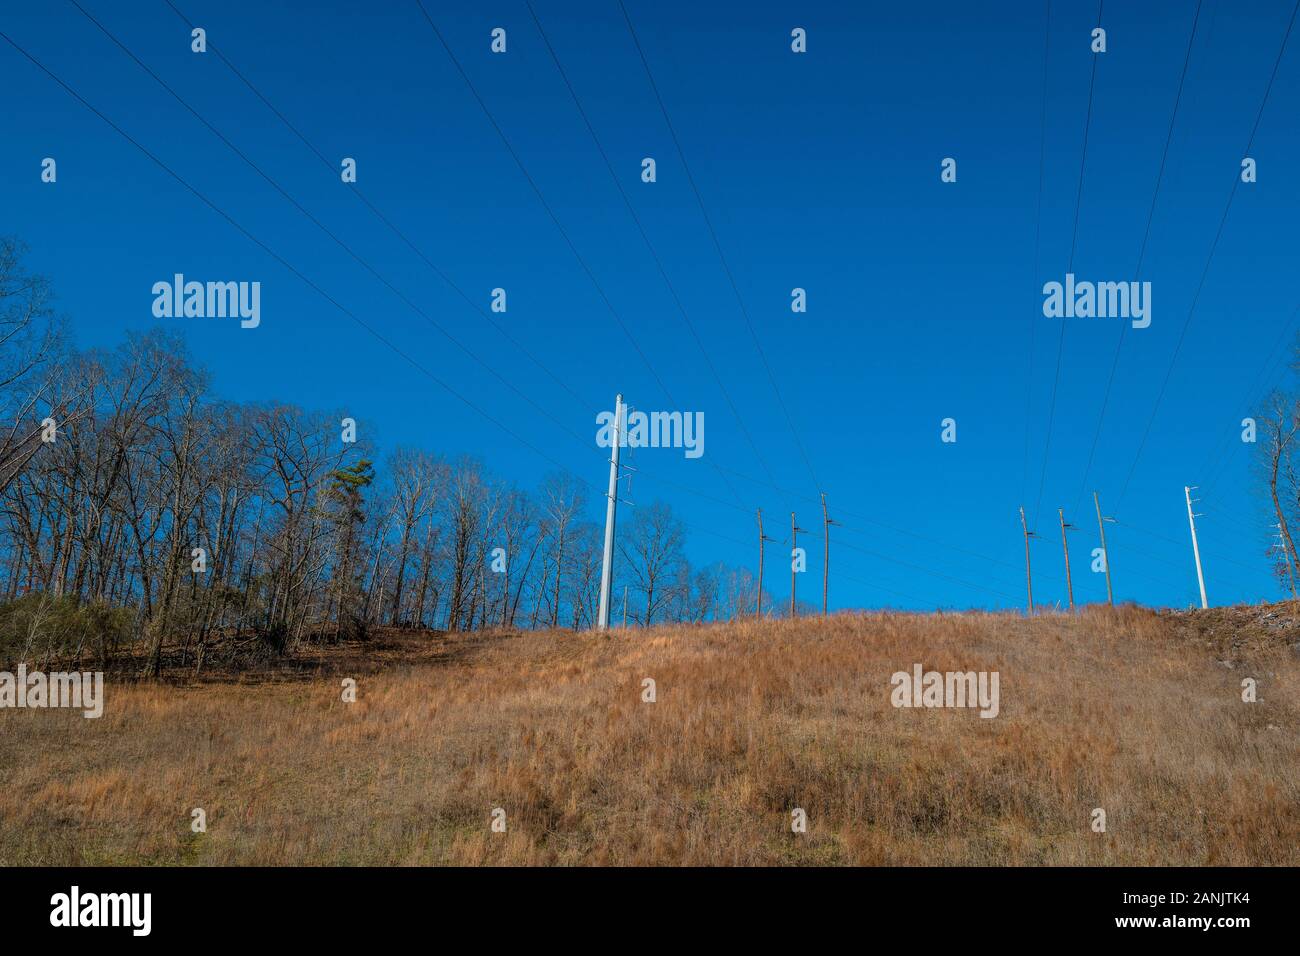 High up on a hill are wooden and metal power lines in a field with tall grasses cutting through the woodlands alongside on clear blue sky sunny day in Stock Photo